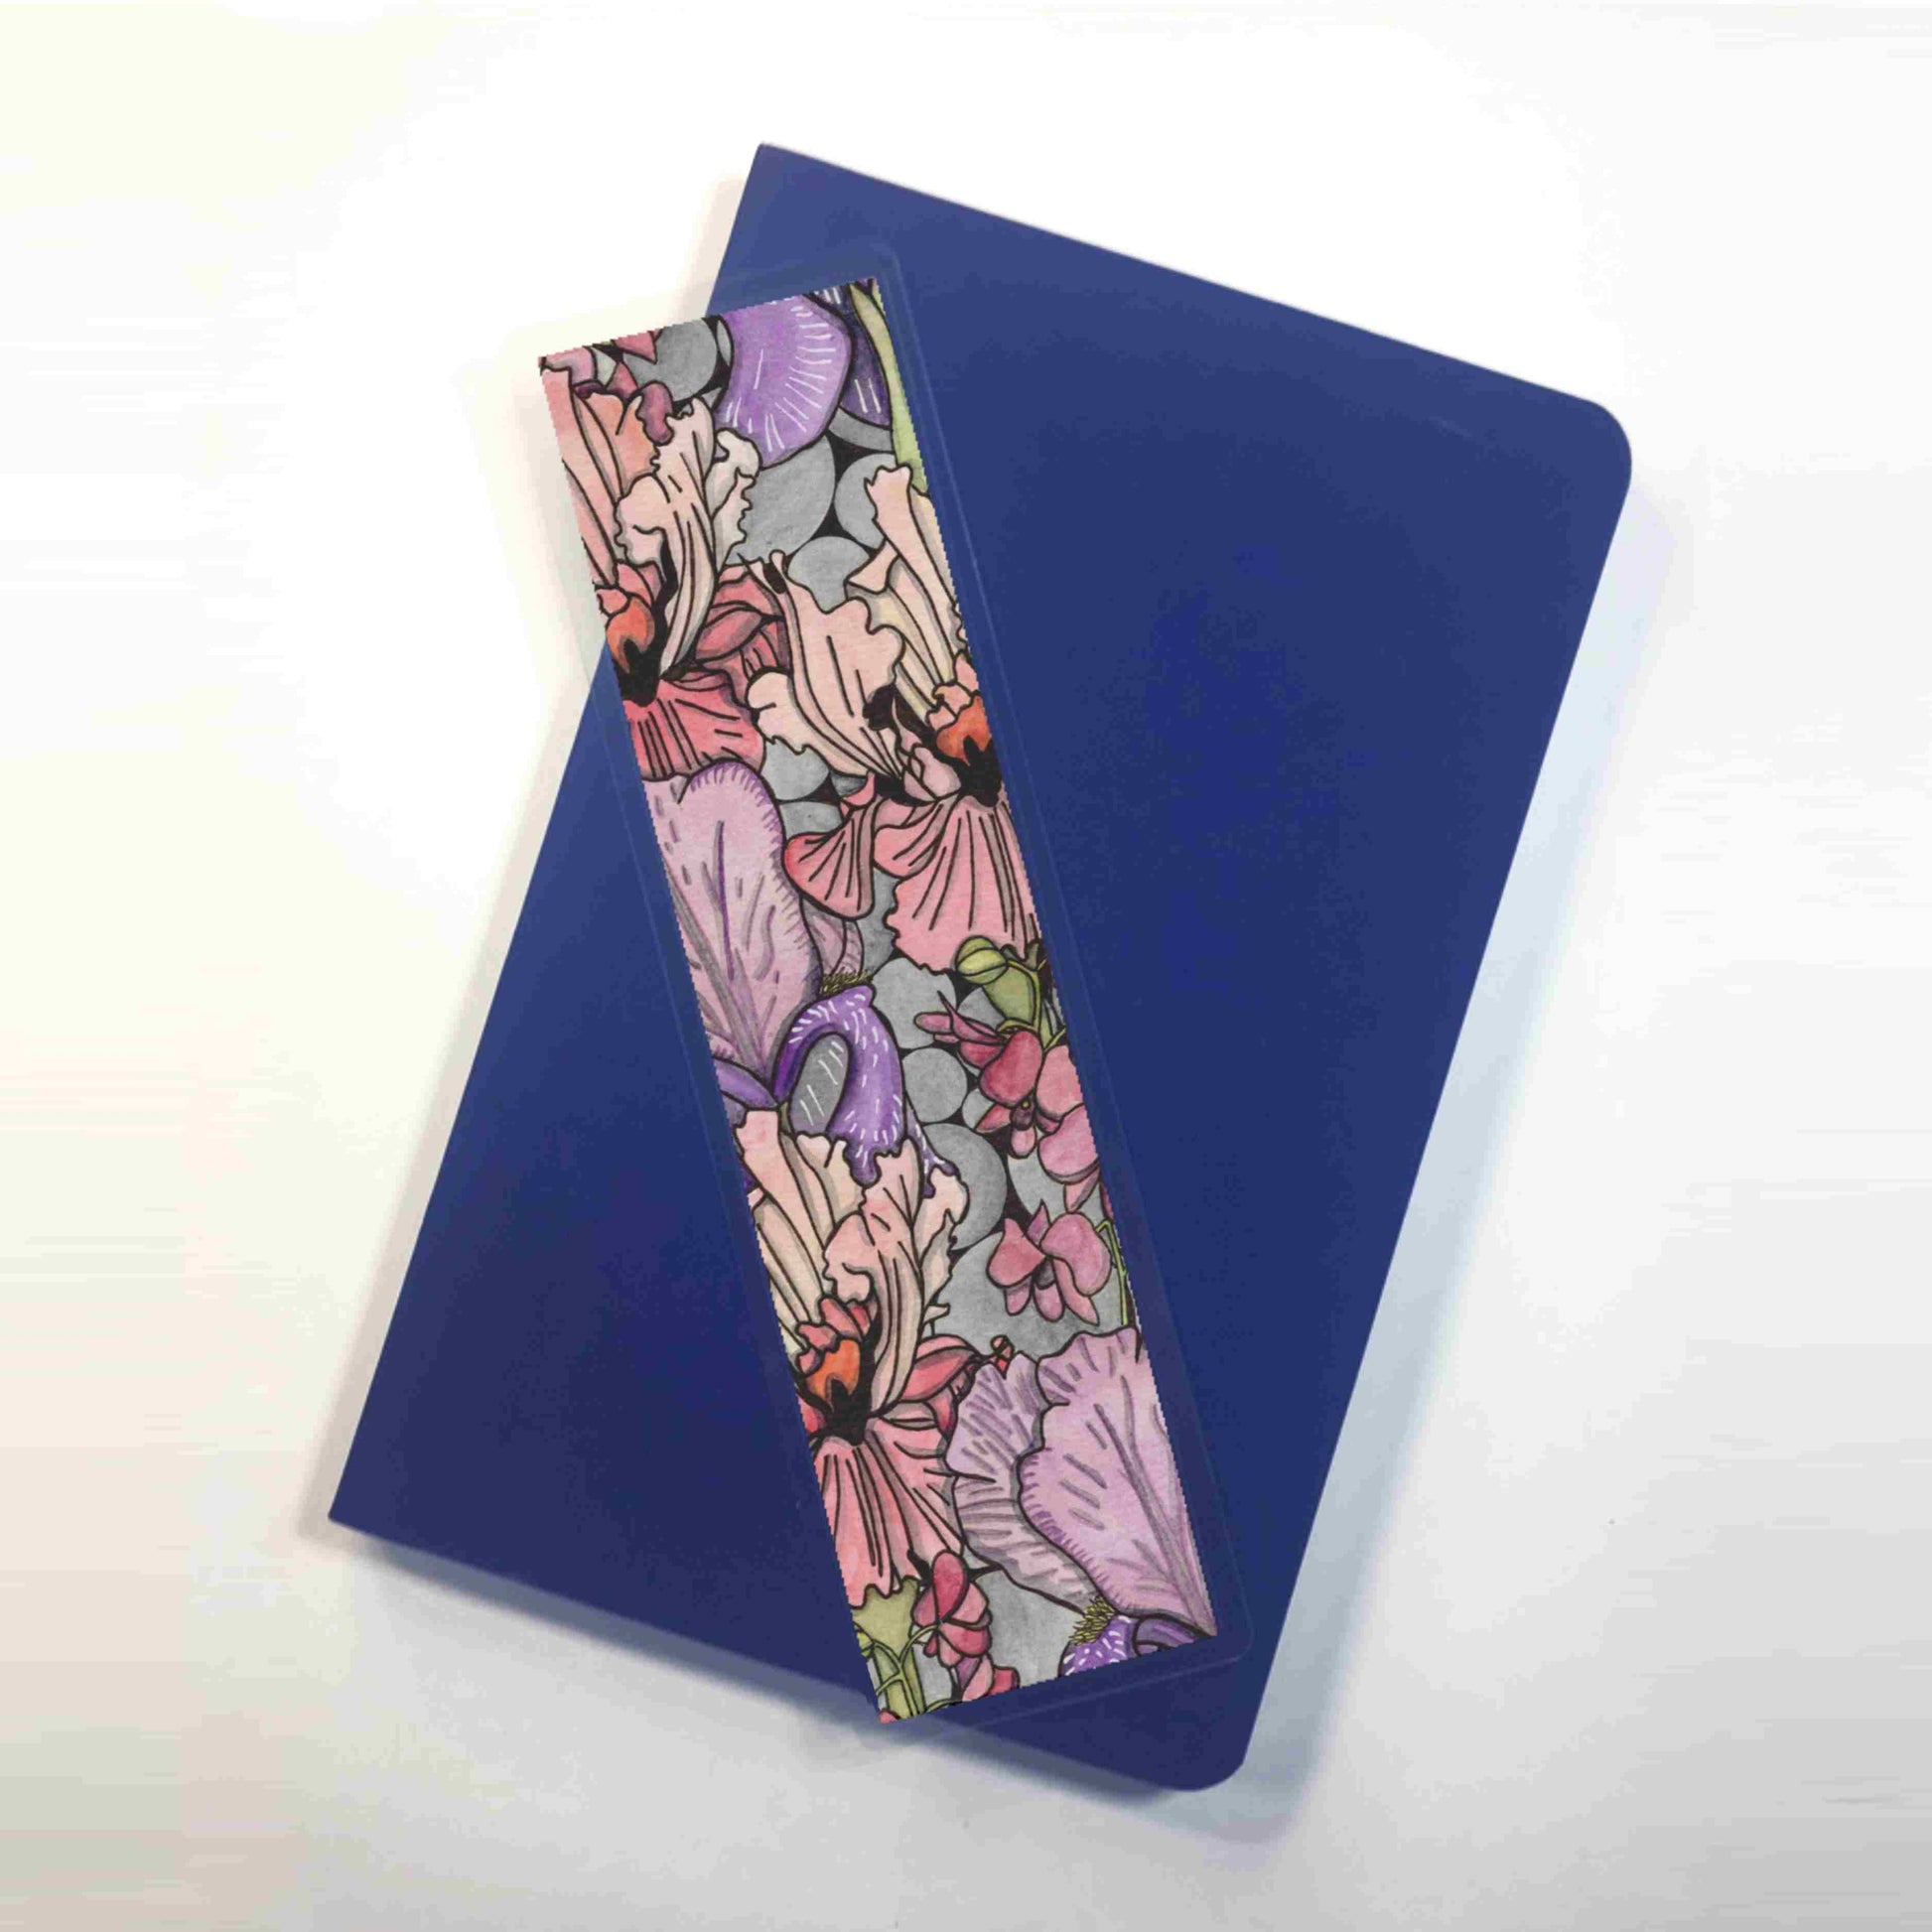 PinkPolish Design Bookmarks "Floral Repetition" 2-Sided Bookmark